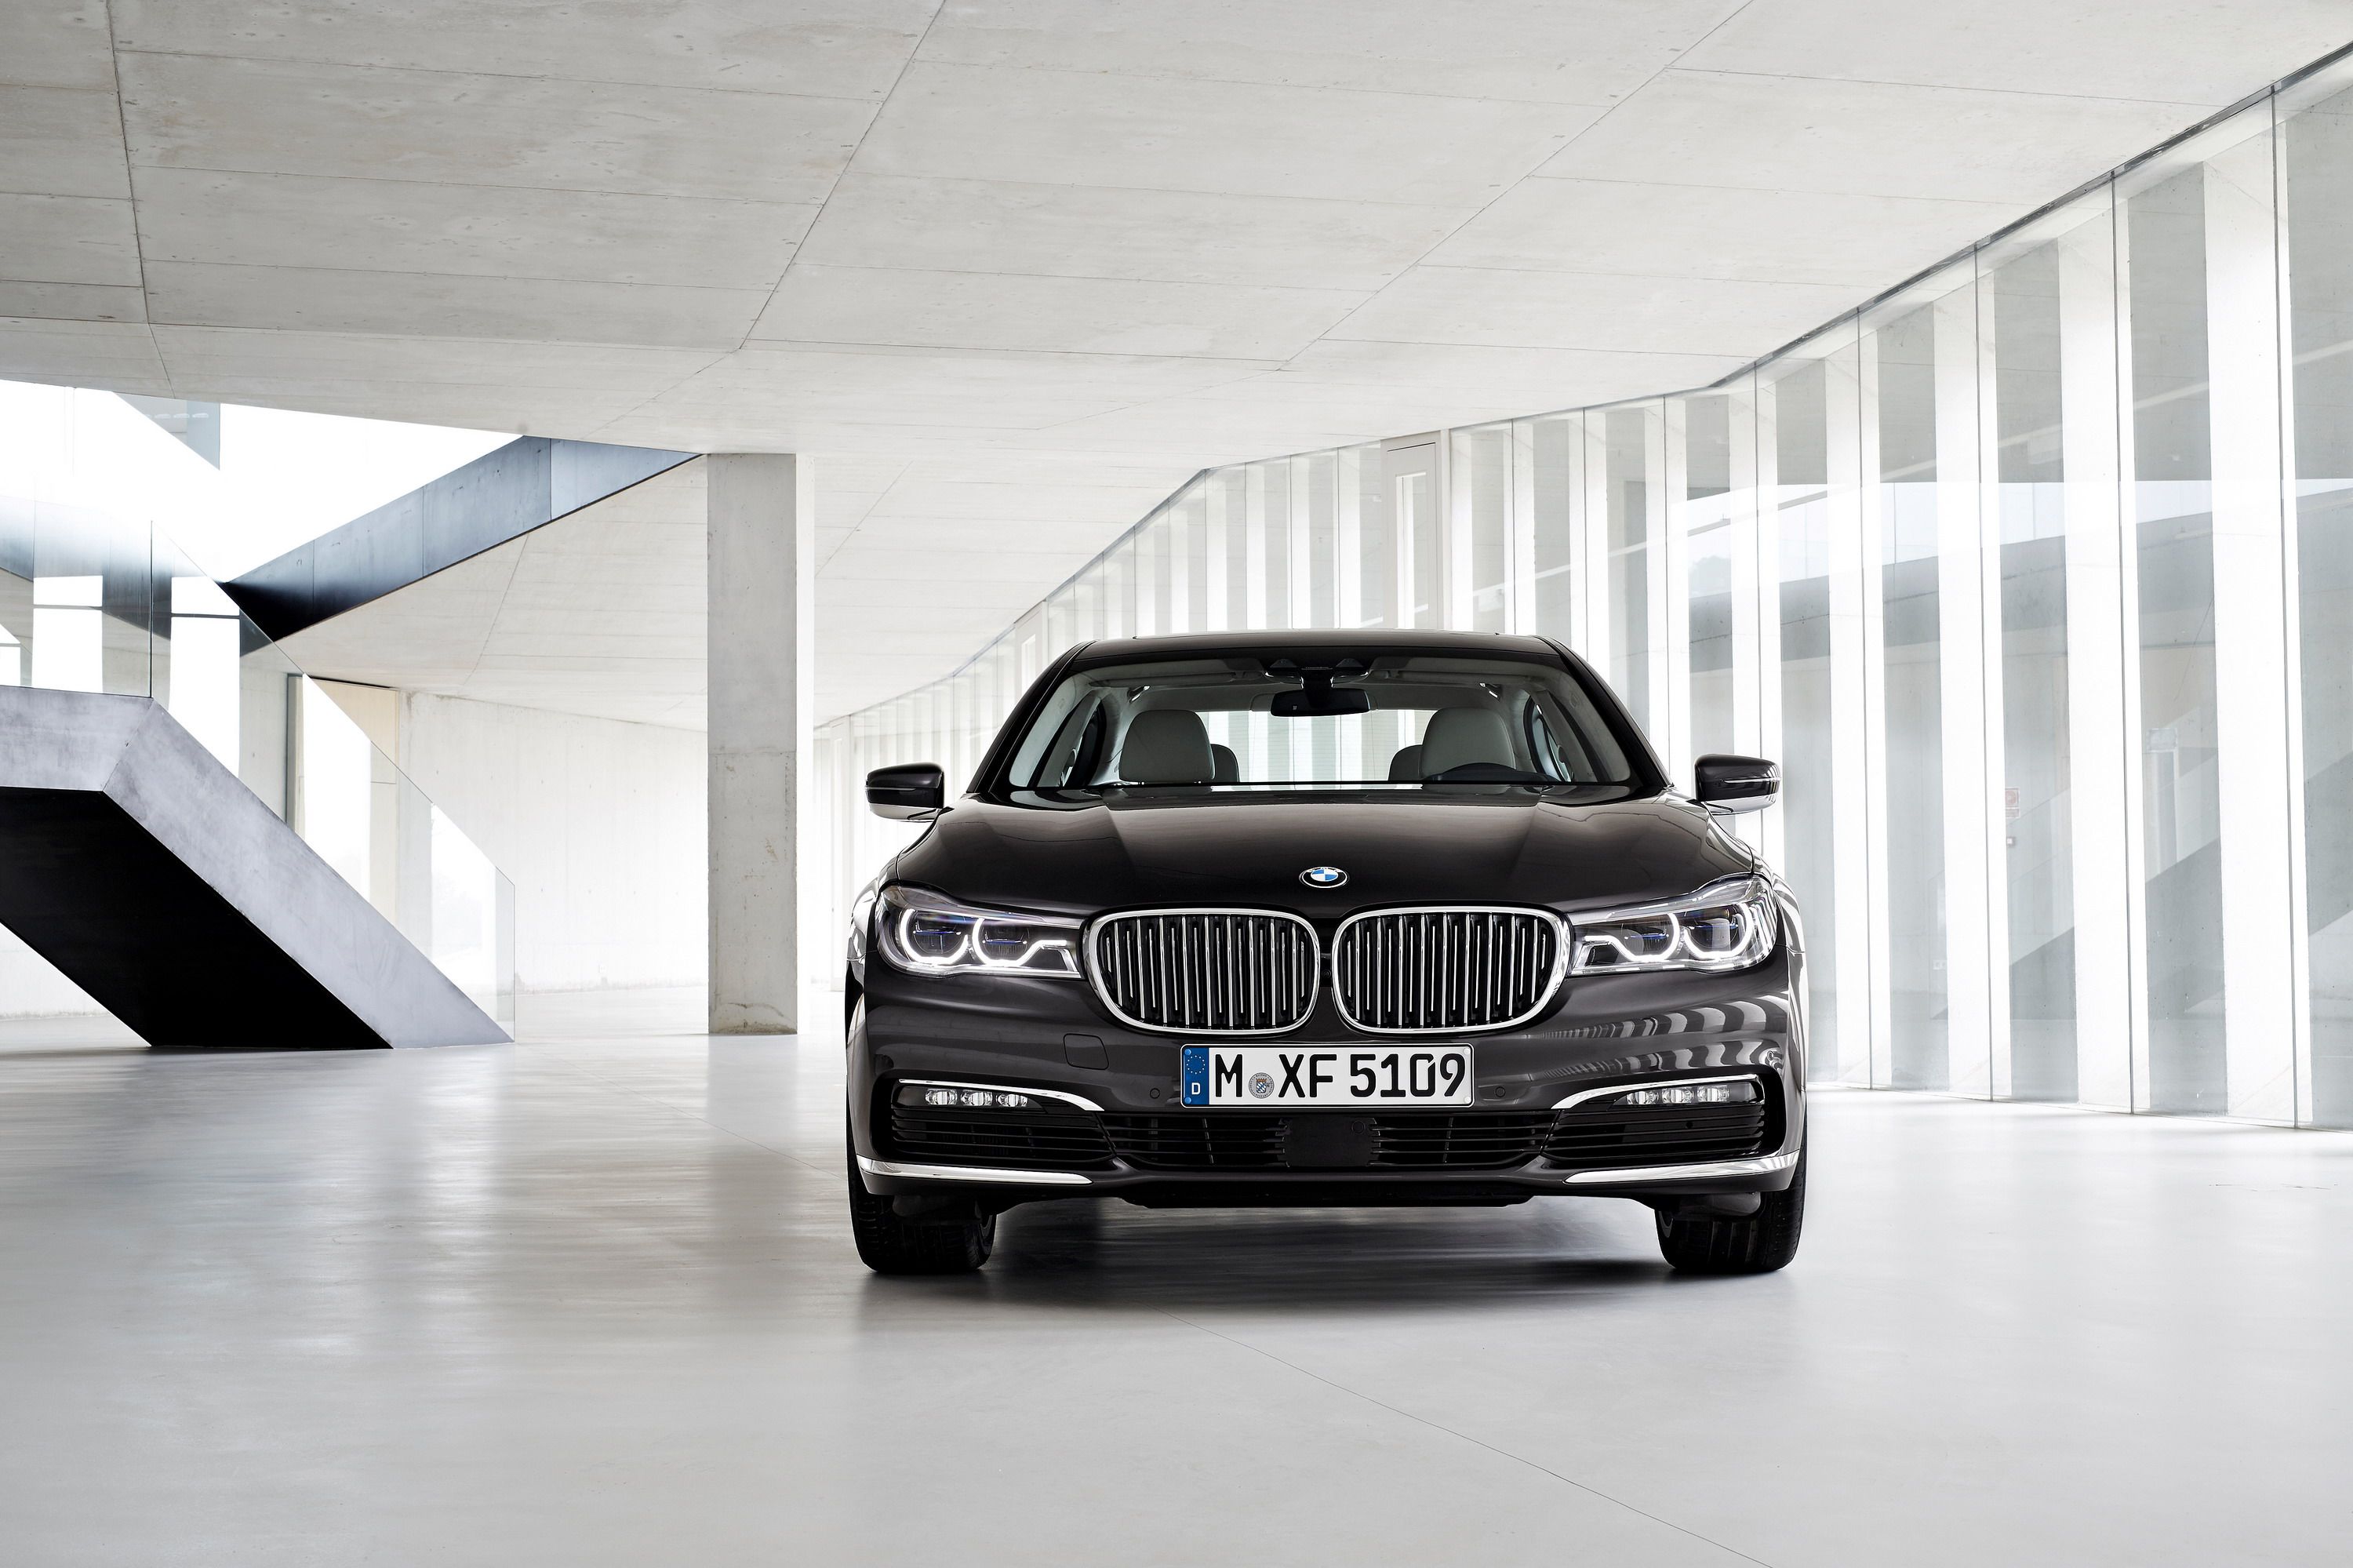 2016 BMW Officially Unveiled The New Generation 7-Series